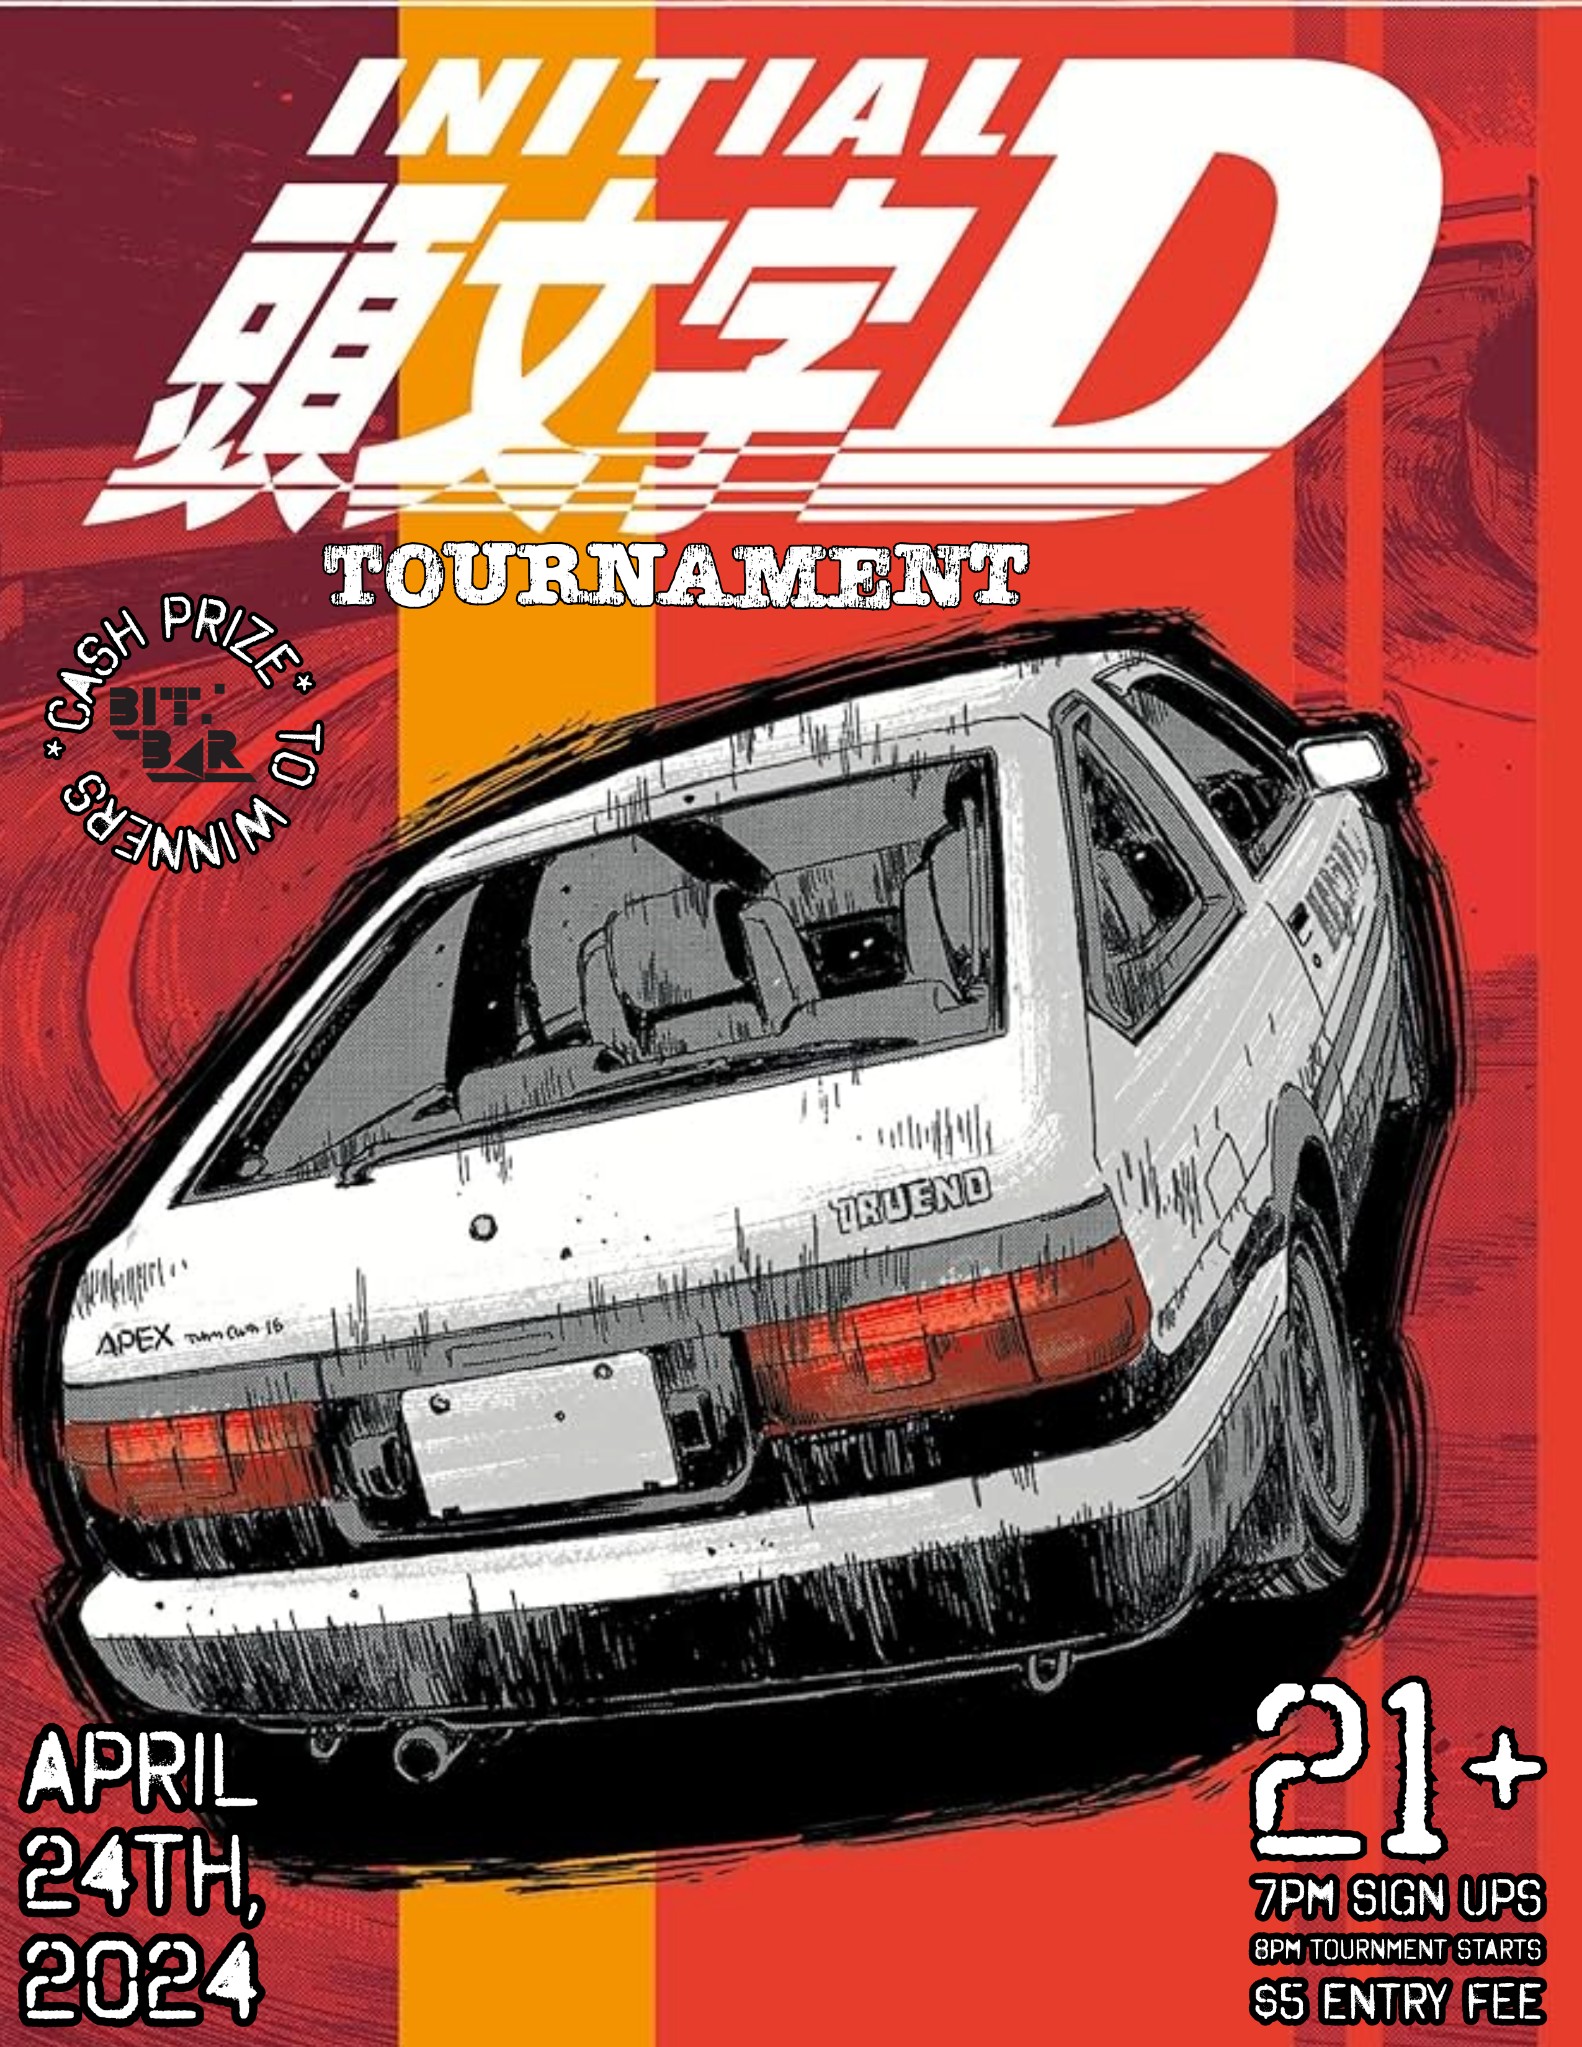 Get ready for the ultimate "Initial D Tournament"! Our eye-catching poster showcases a unique art style featuring the iconic Toyota AE86 car. Don't miss to check out all the important tournament details and dates. Boost your gaming experience to whole new levels in this heart-pounding race. Remember to bookmark the program - it's a high-speed event you don't want to miss!